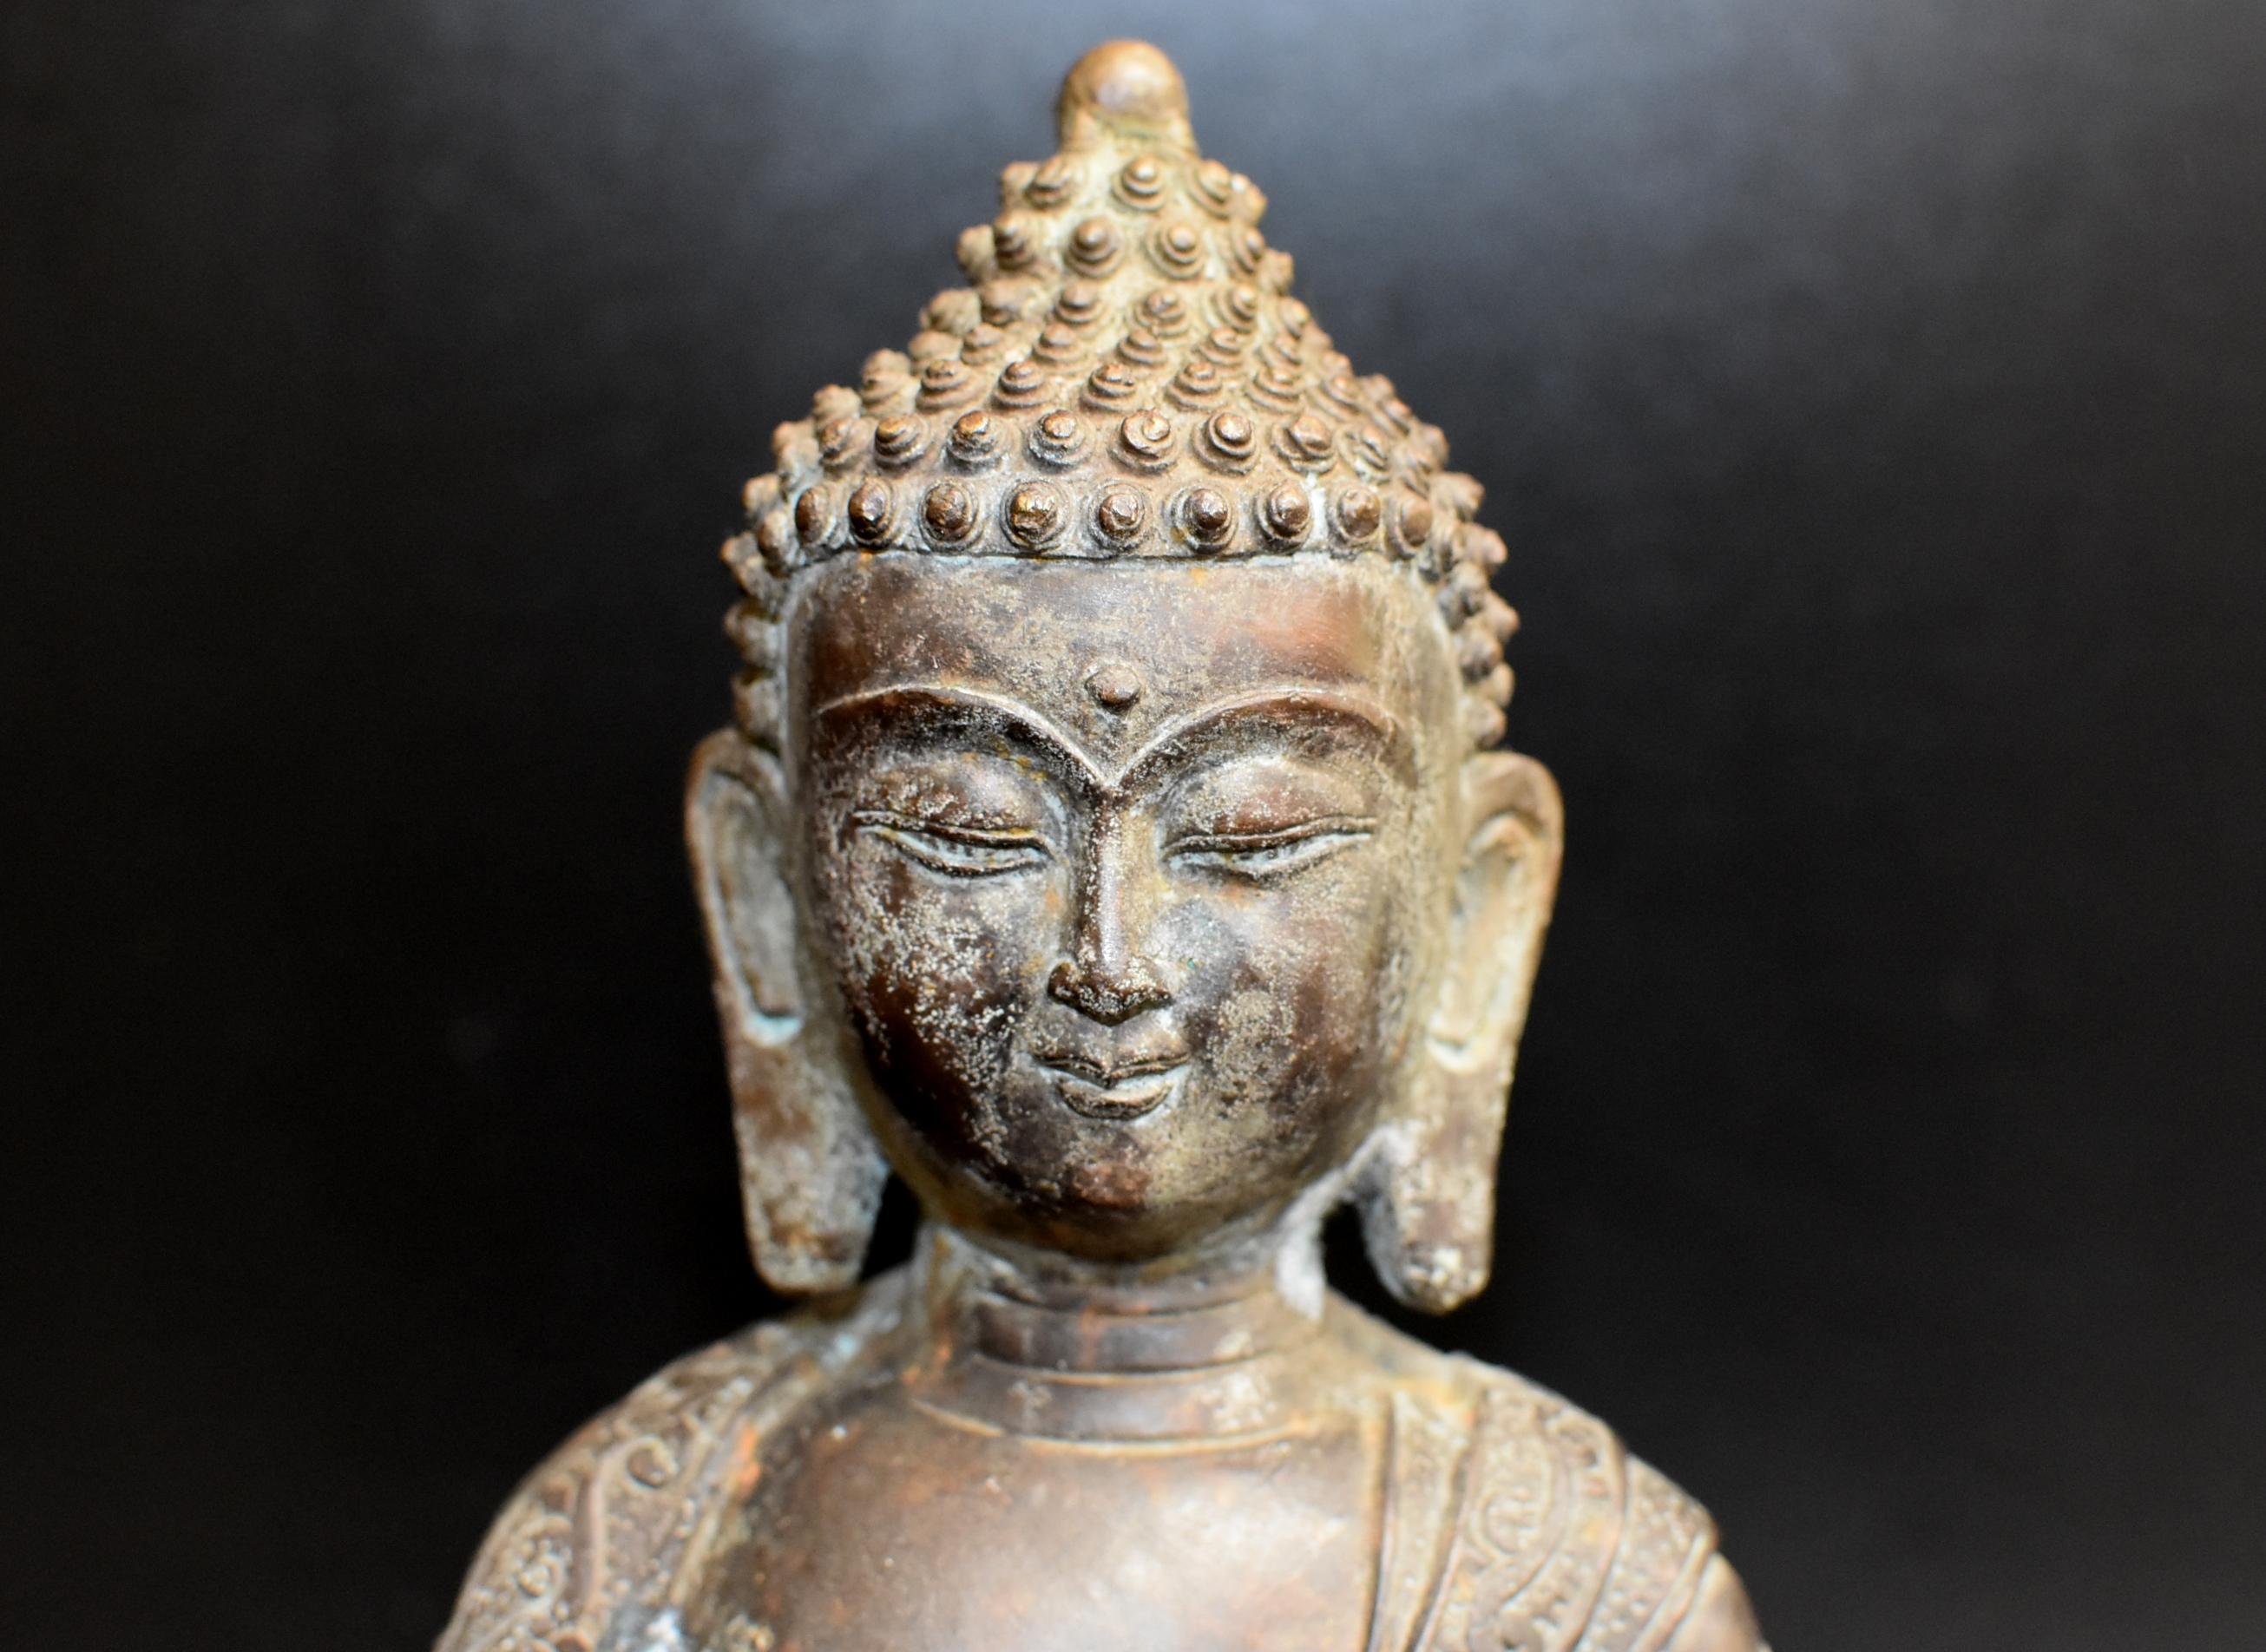 Chinese Antique Bronze Buddha, Charity and Compassion